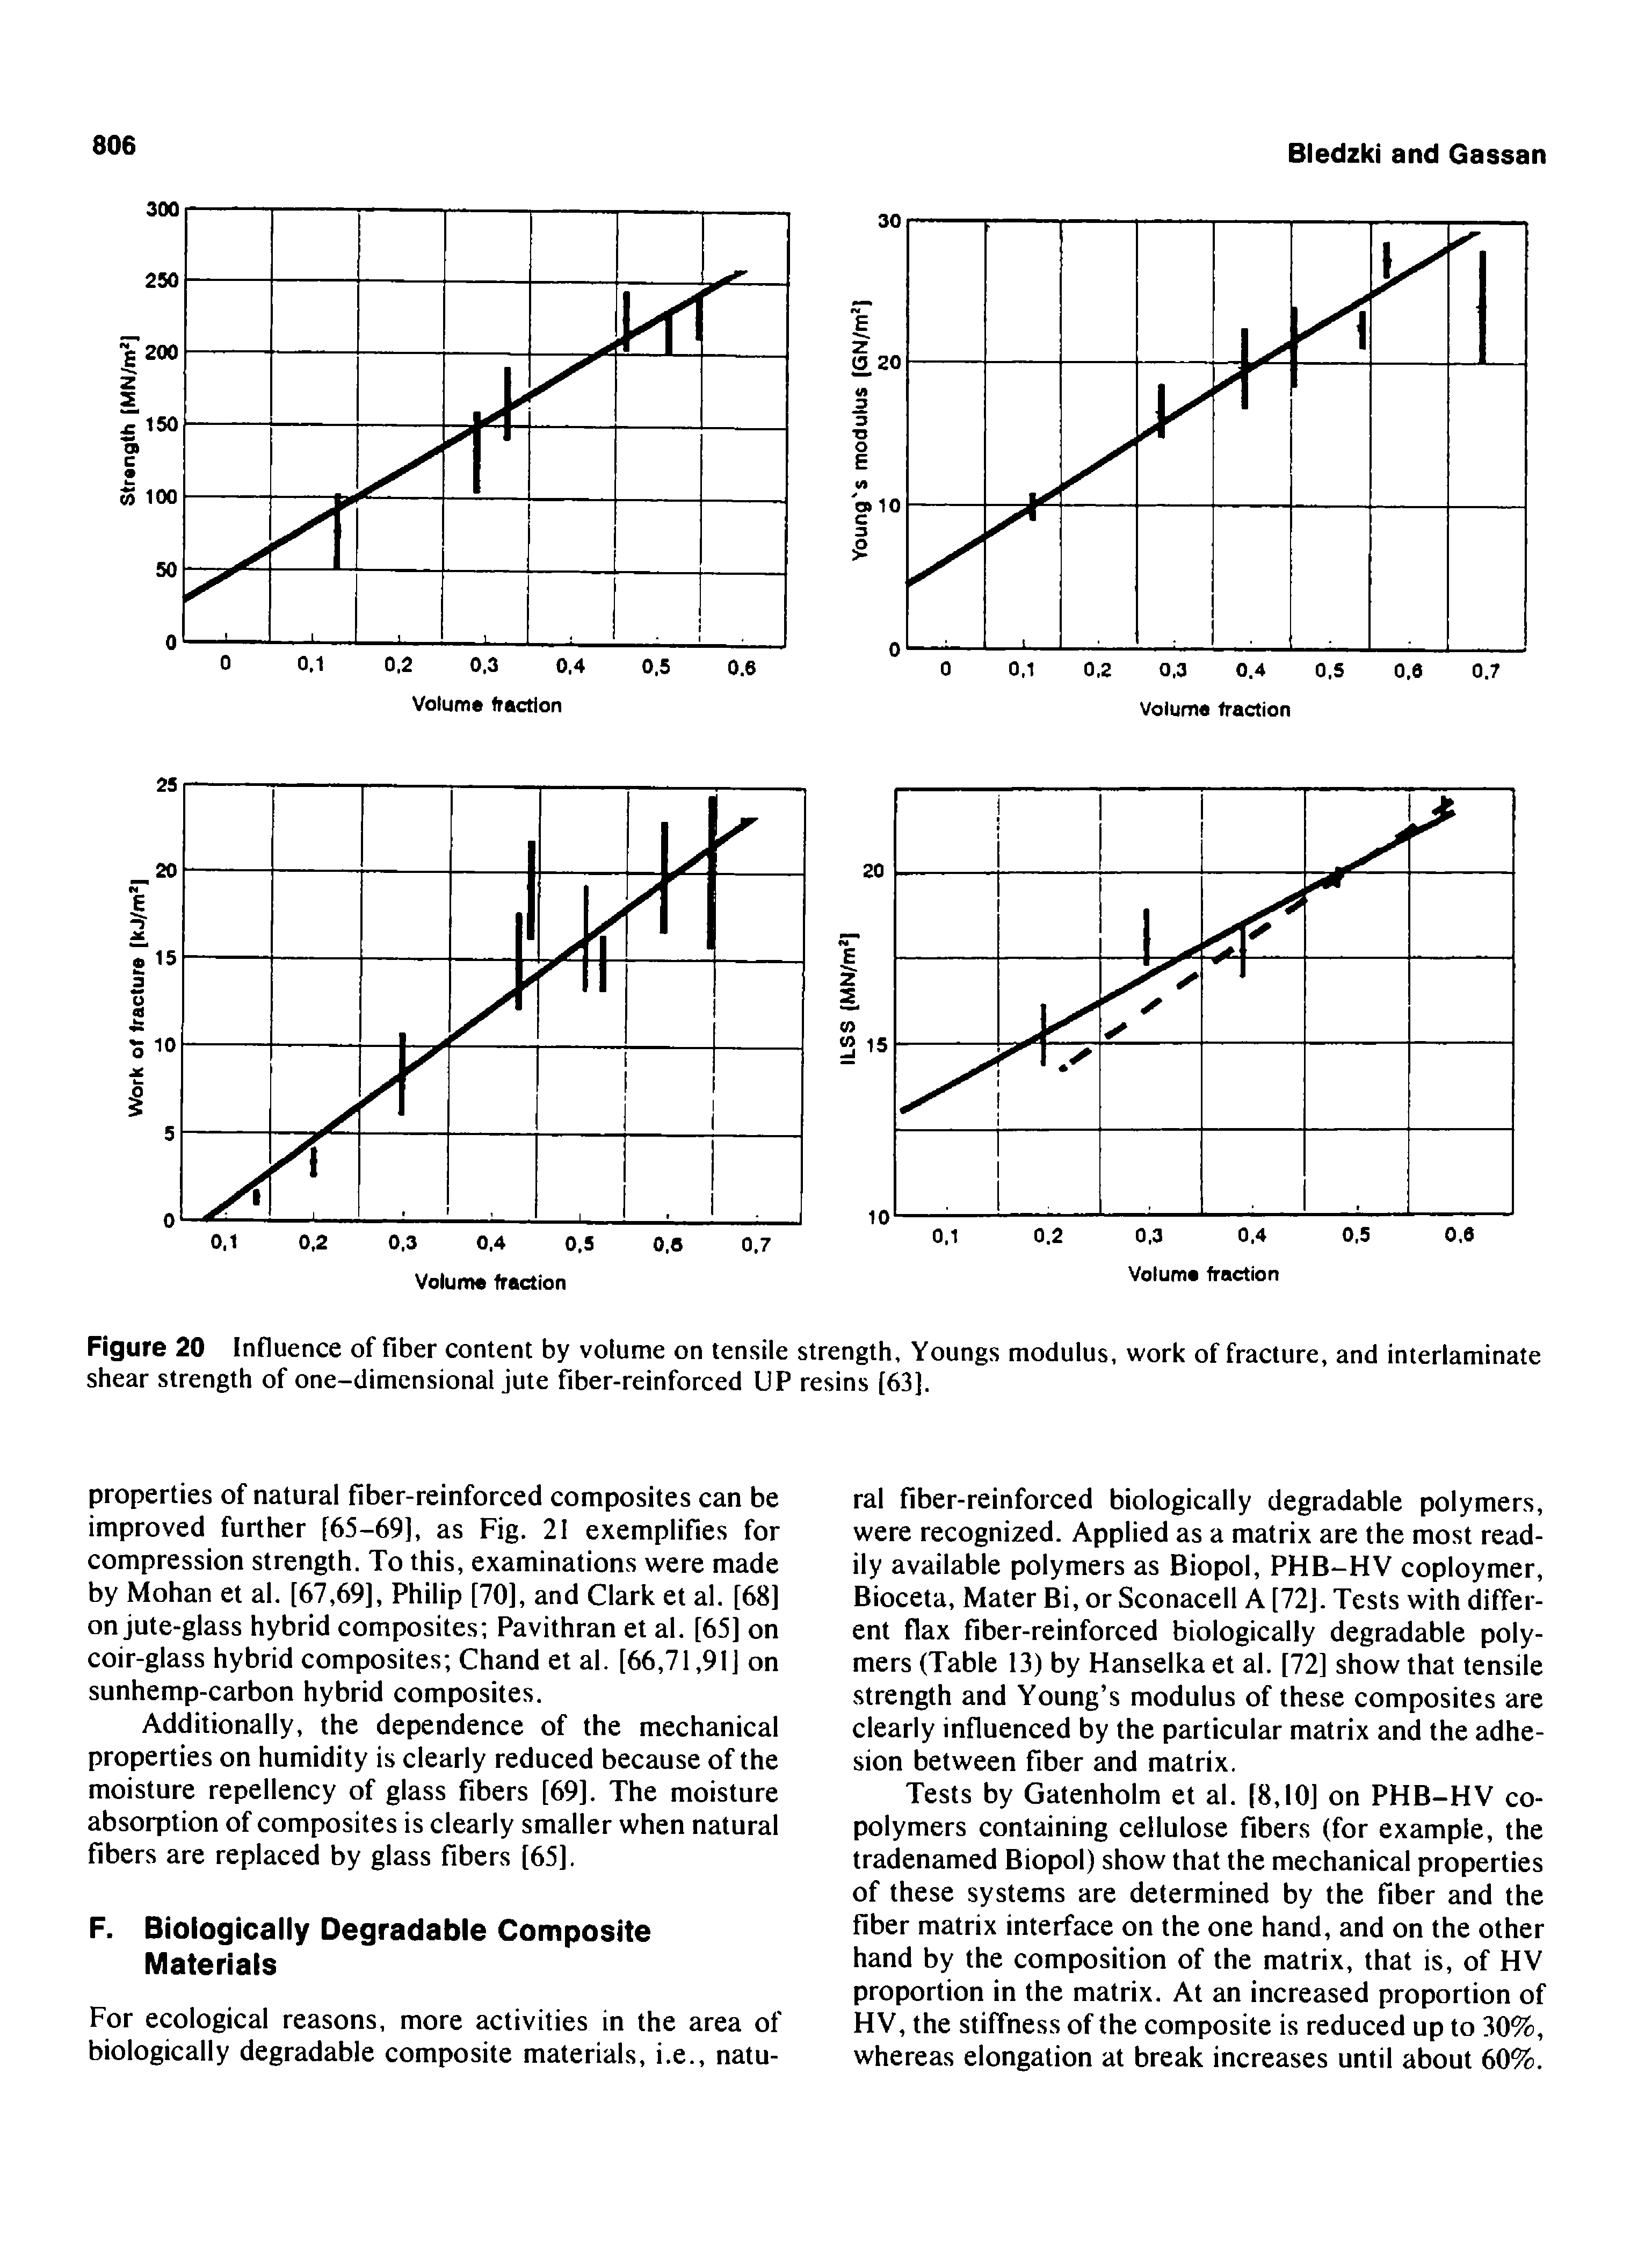 Figure 20 Influence of fiber content by volume on tensile strength. Youngs modulus, work of fracture, and interlaminate shear strength of one-dimensional jute fiber-reinforced UP resins [63].